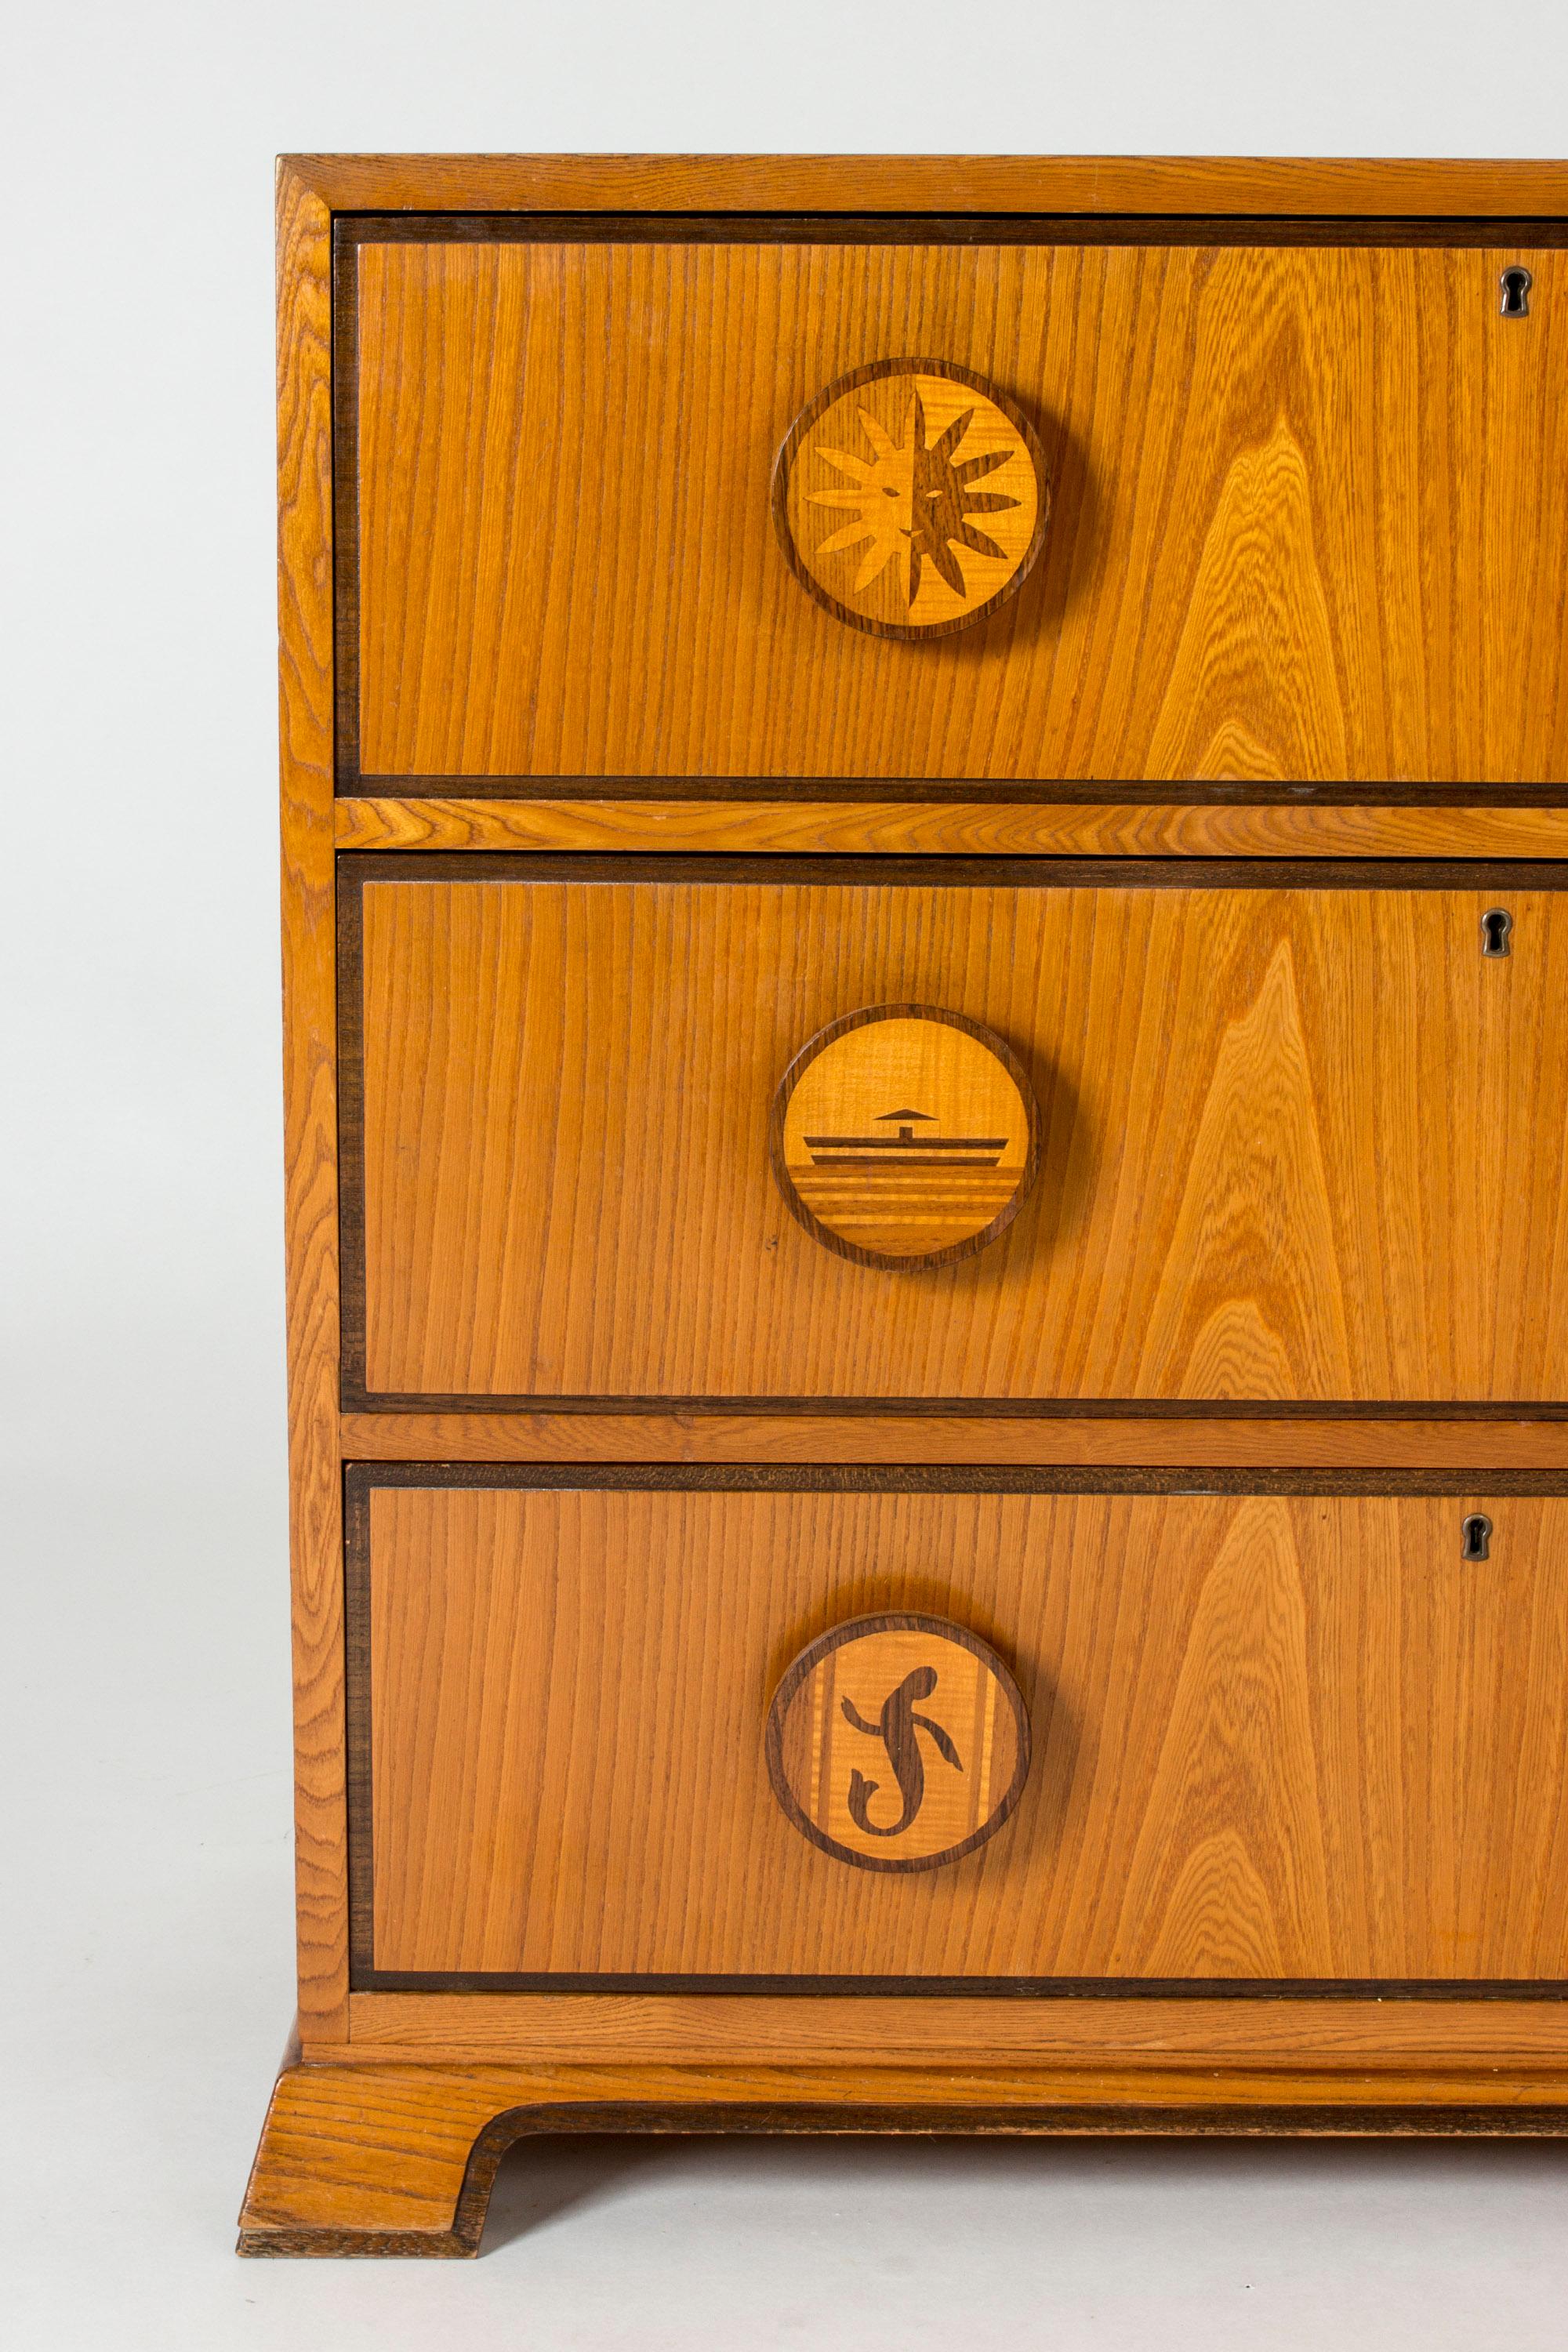 Mahogany 1940s Swedish Modern Chest of Drawers by Otto Schulz for Boet, Sweden